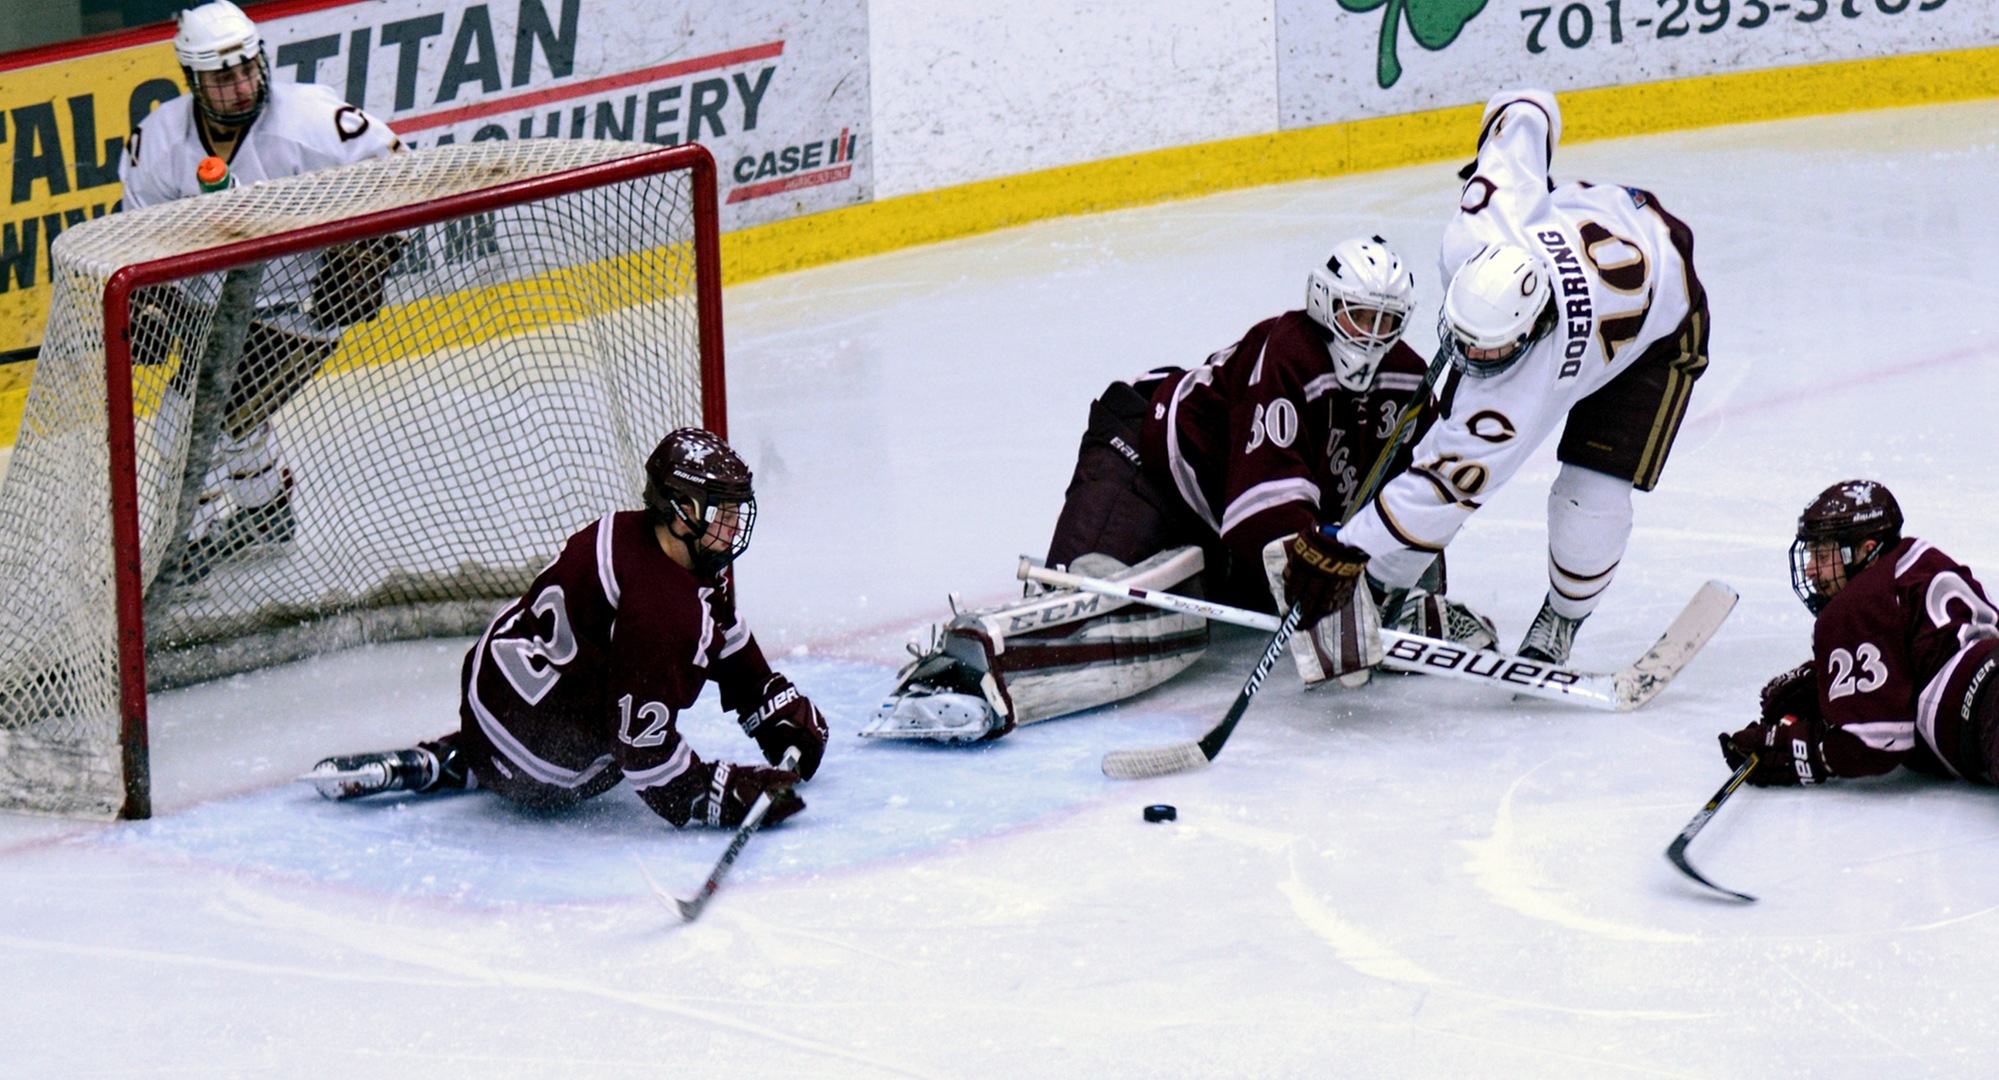 Zach Doerring had an assist on the lone Cobber goal in CC's loss at #11 Augsburg.